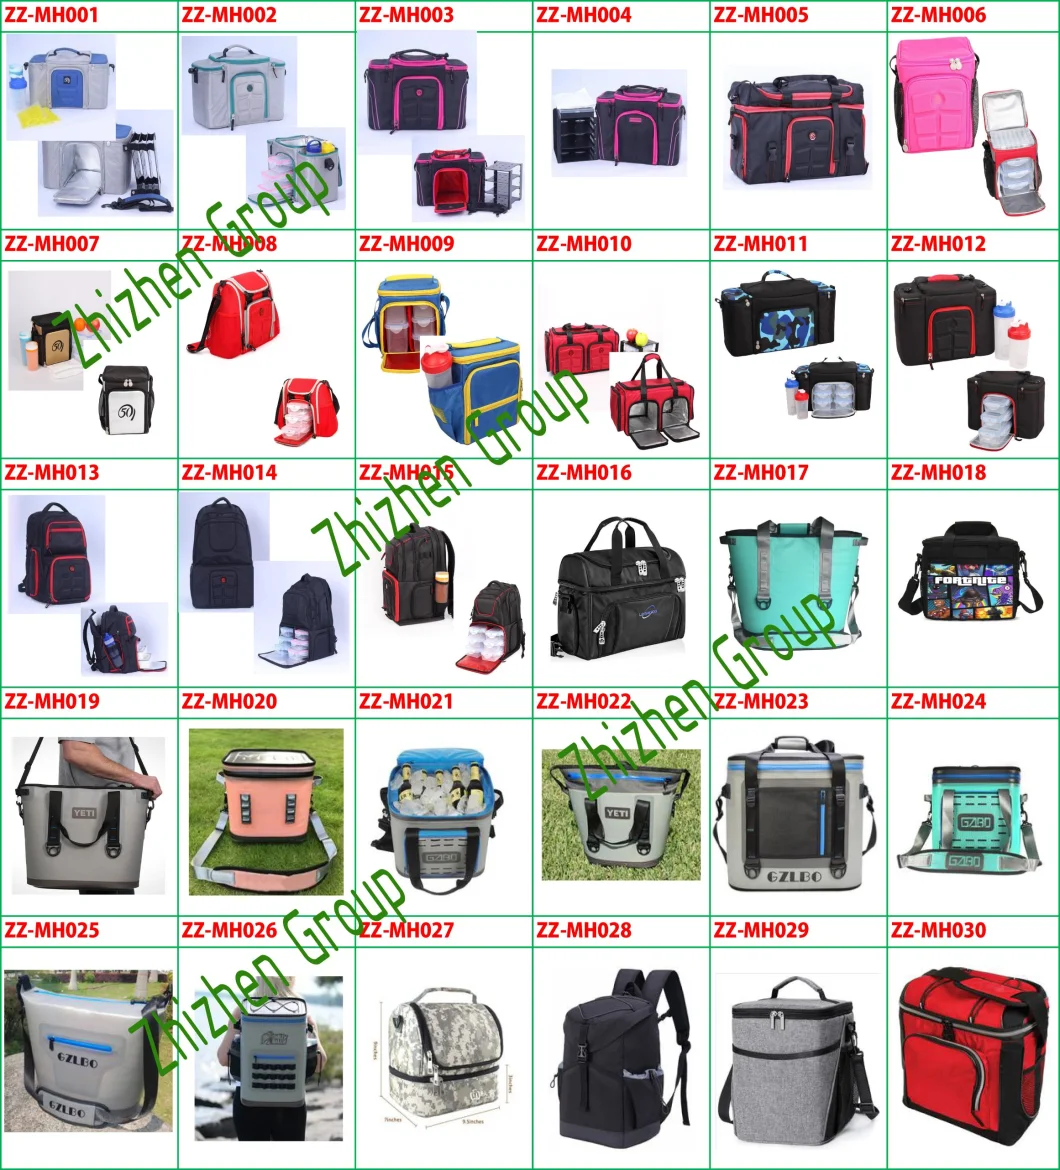 18 Can Cooler Bag, Coolers & Insulated Bags, Beach Cooler Bag, Insulated Bag, Pinic Cooler Bag